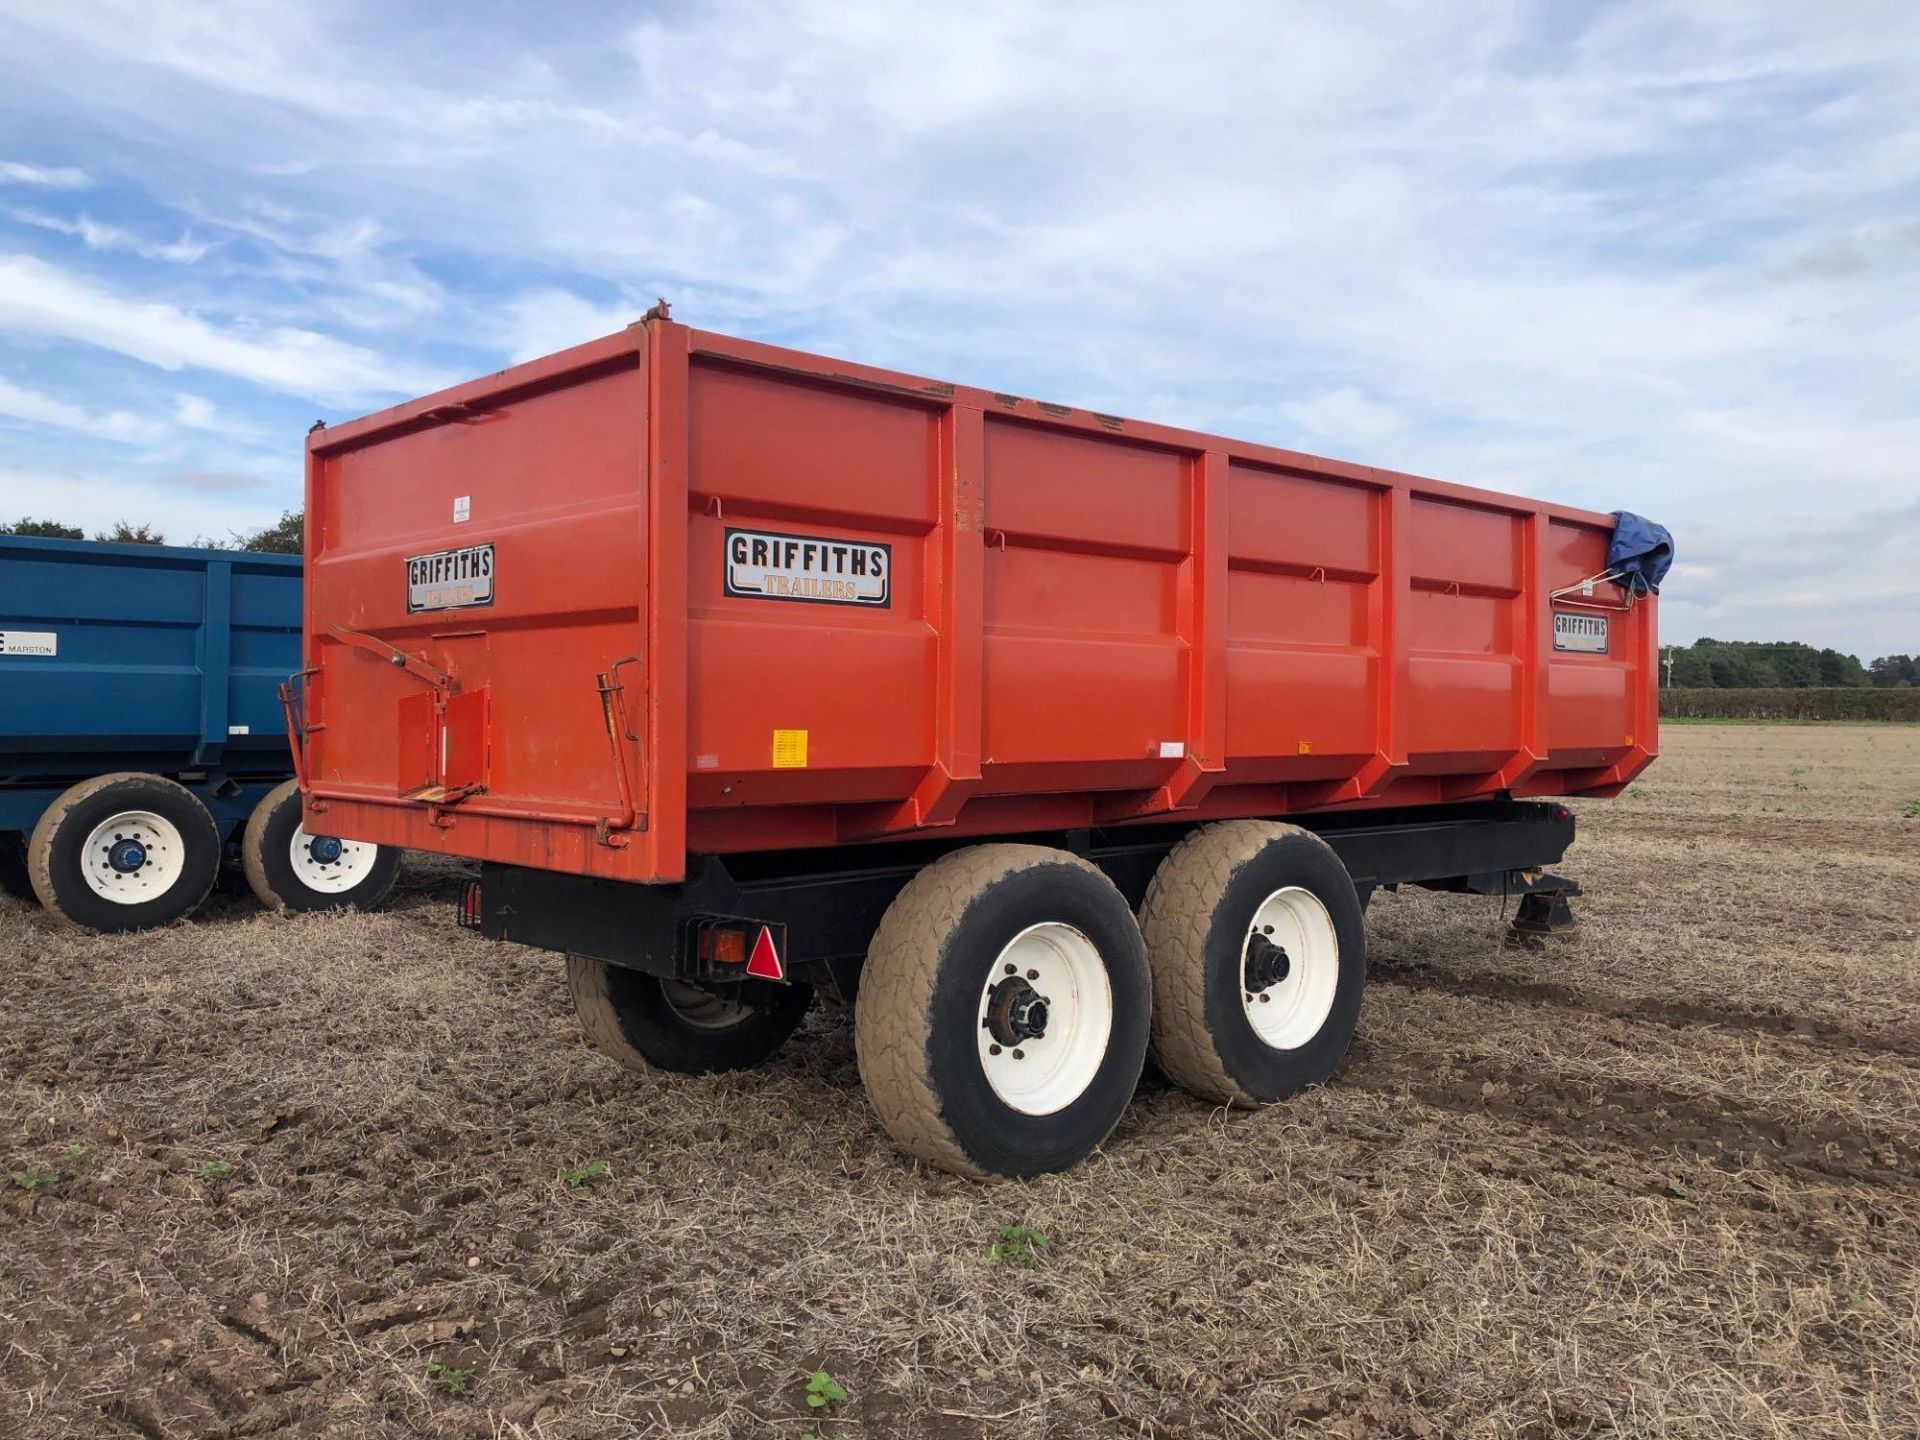 2005 Griffiths GHS120 12t twin axle grain trailer with sprung drawbar, manual tailgate and grain chu - Image 16 of 17